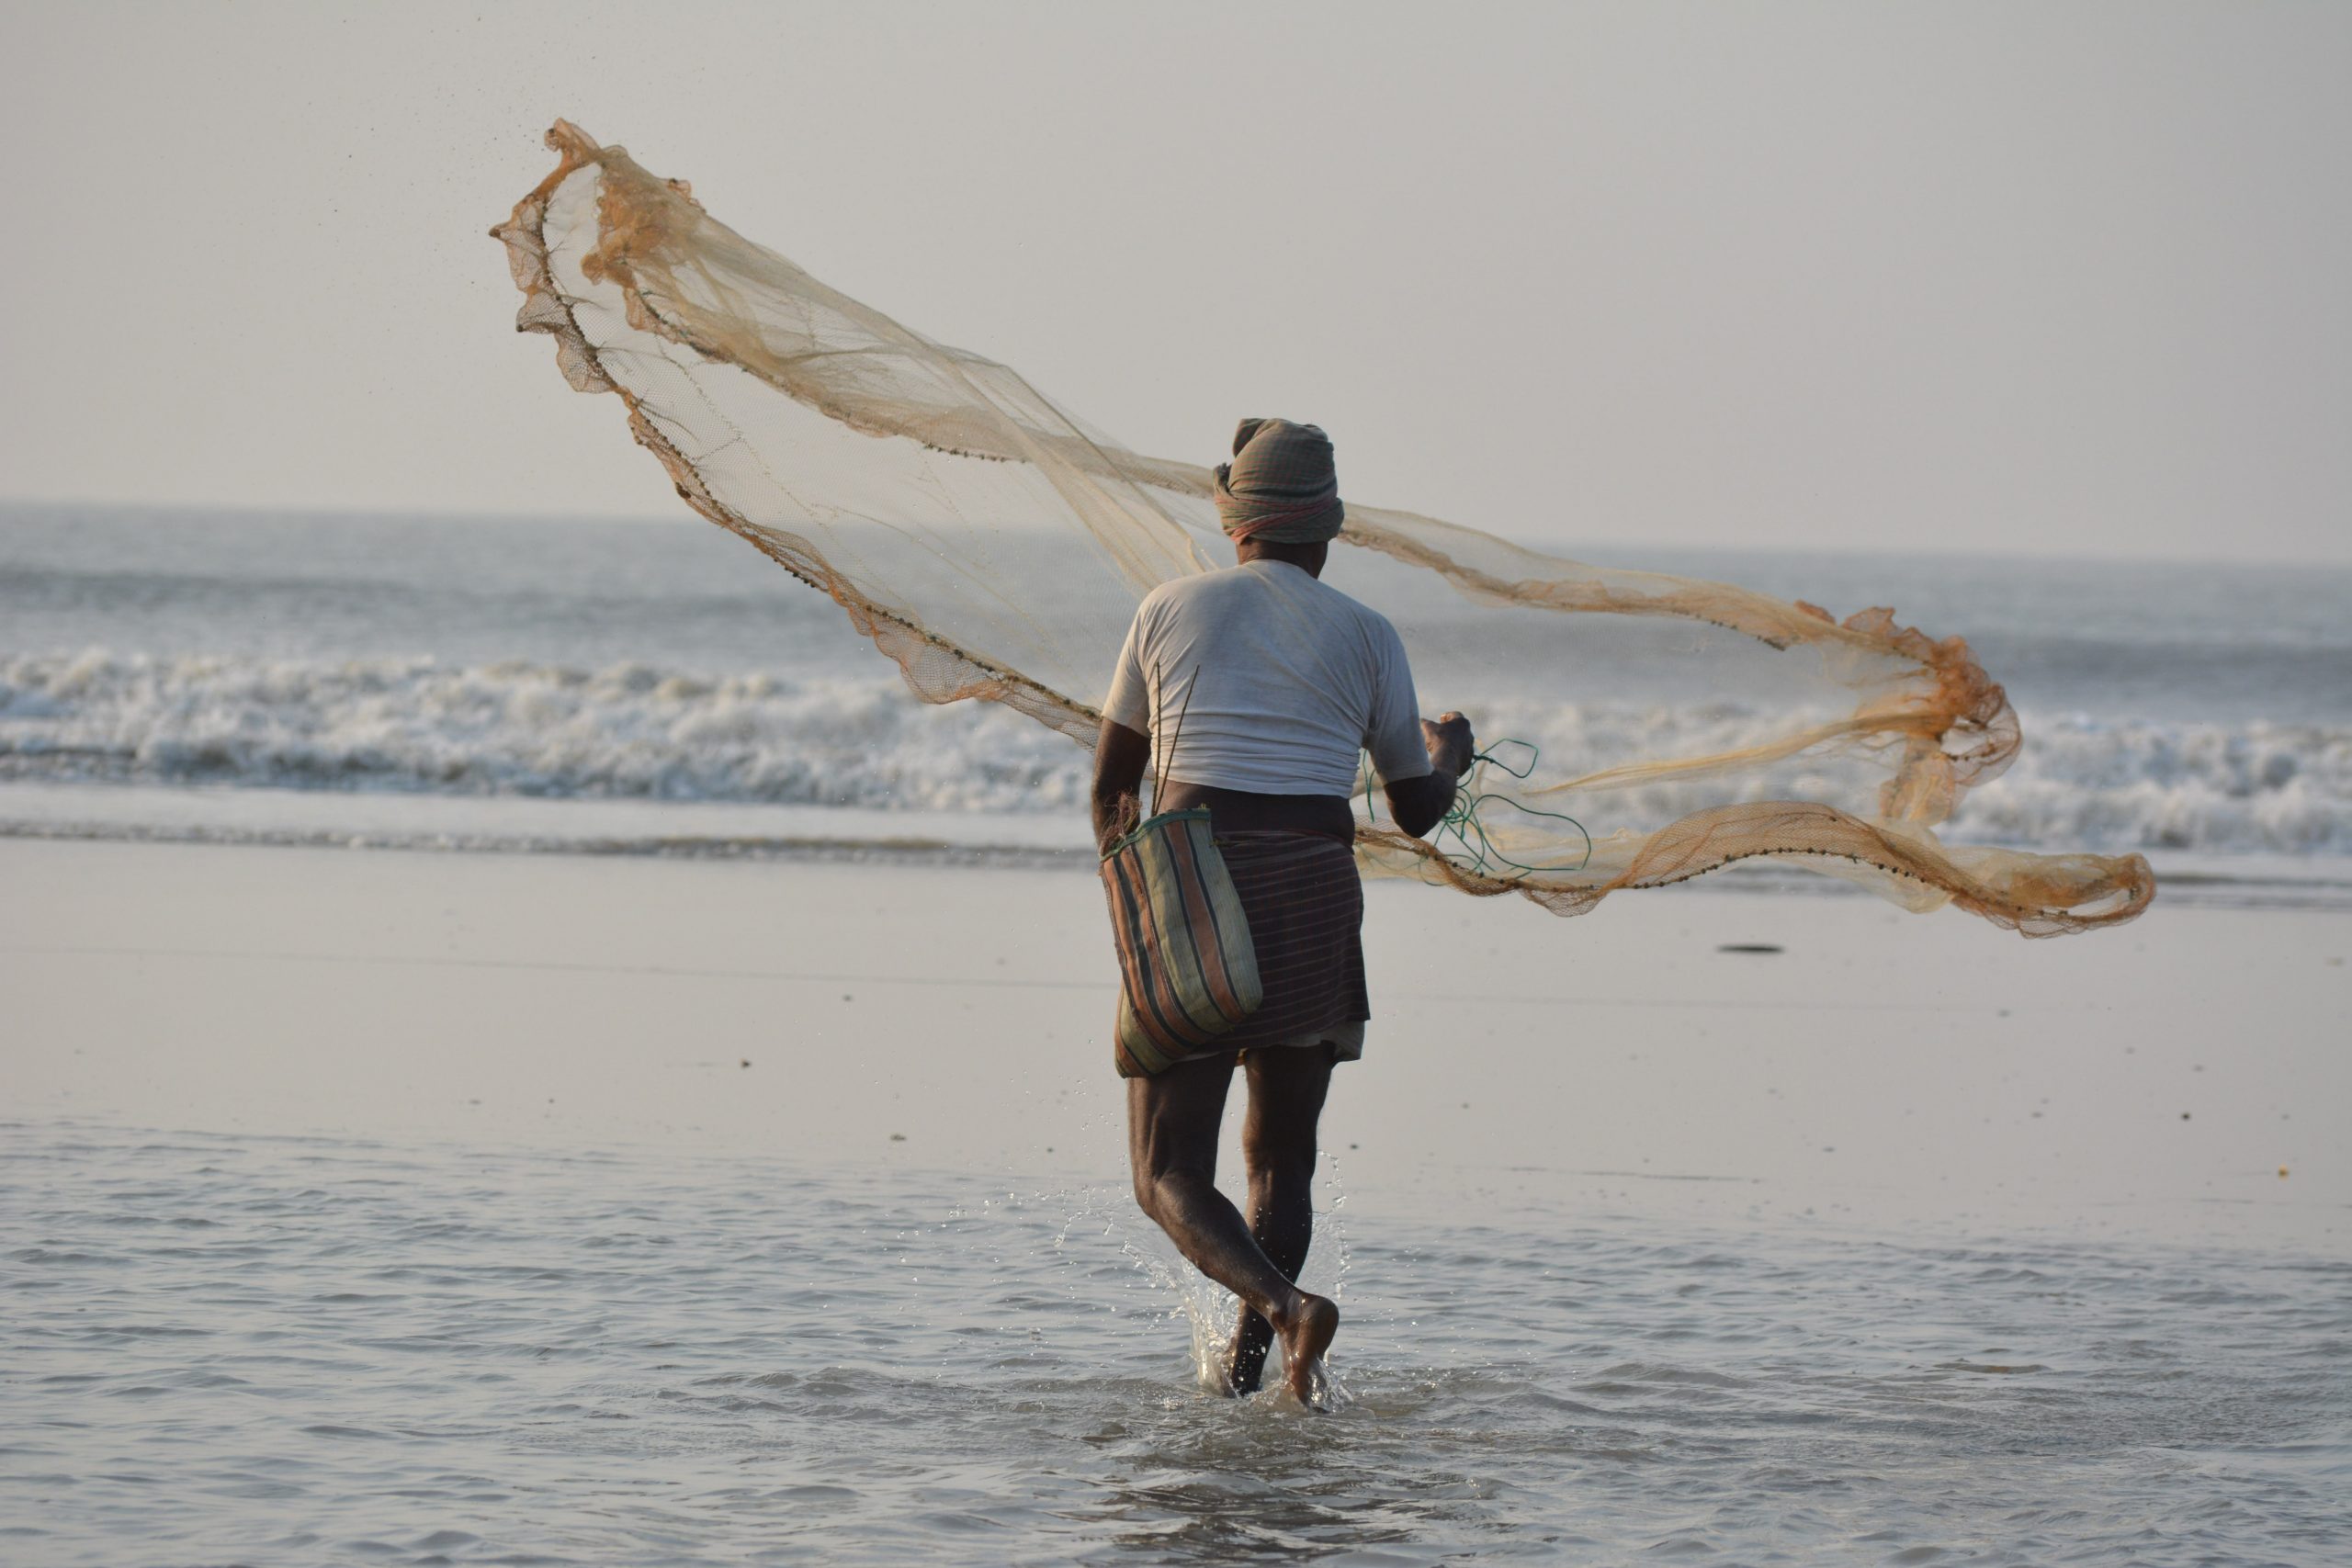 A fisherman spreading his net in water